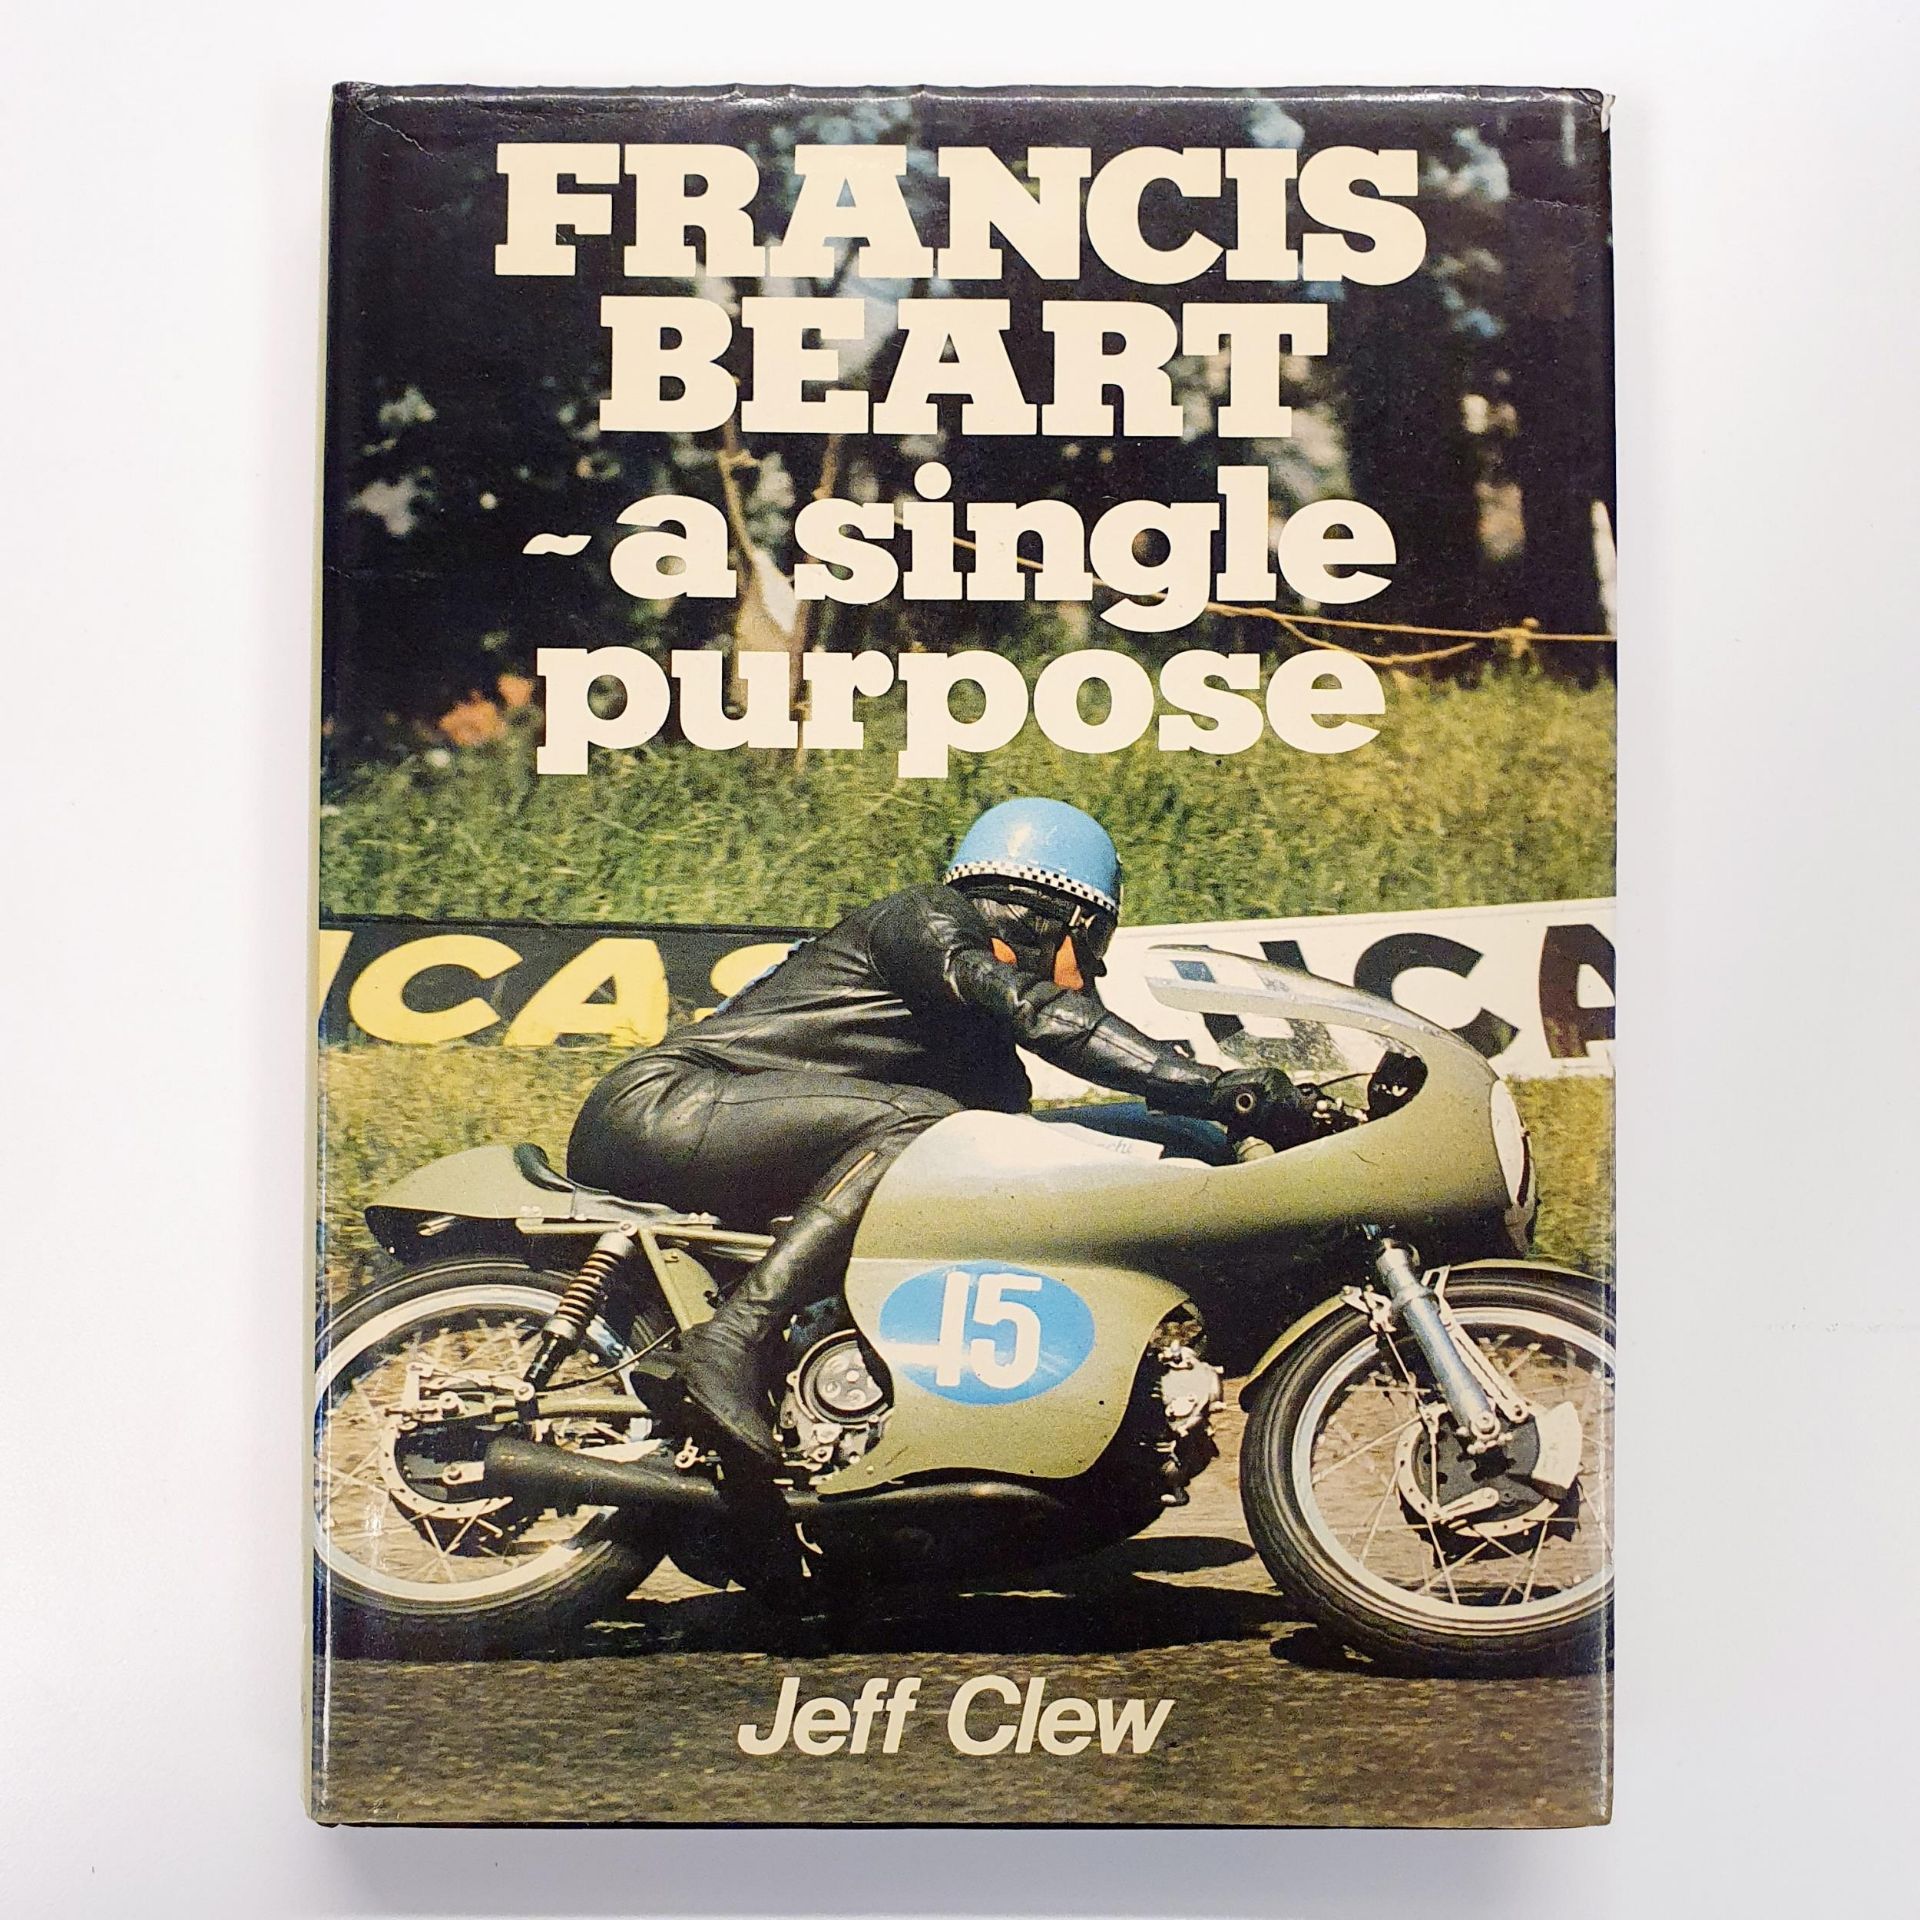 Clew (Jeff), Francis Beart - A Single Purpose, 1975 Provenance: From The Elwyn Roberts Collection